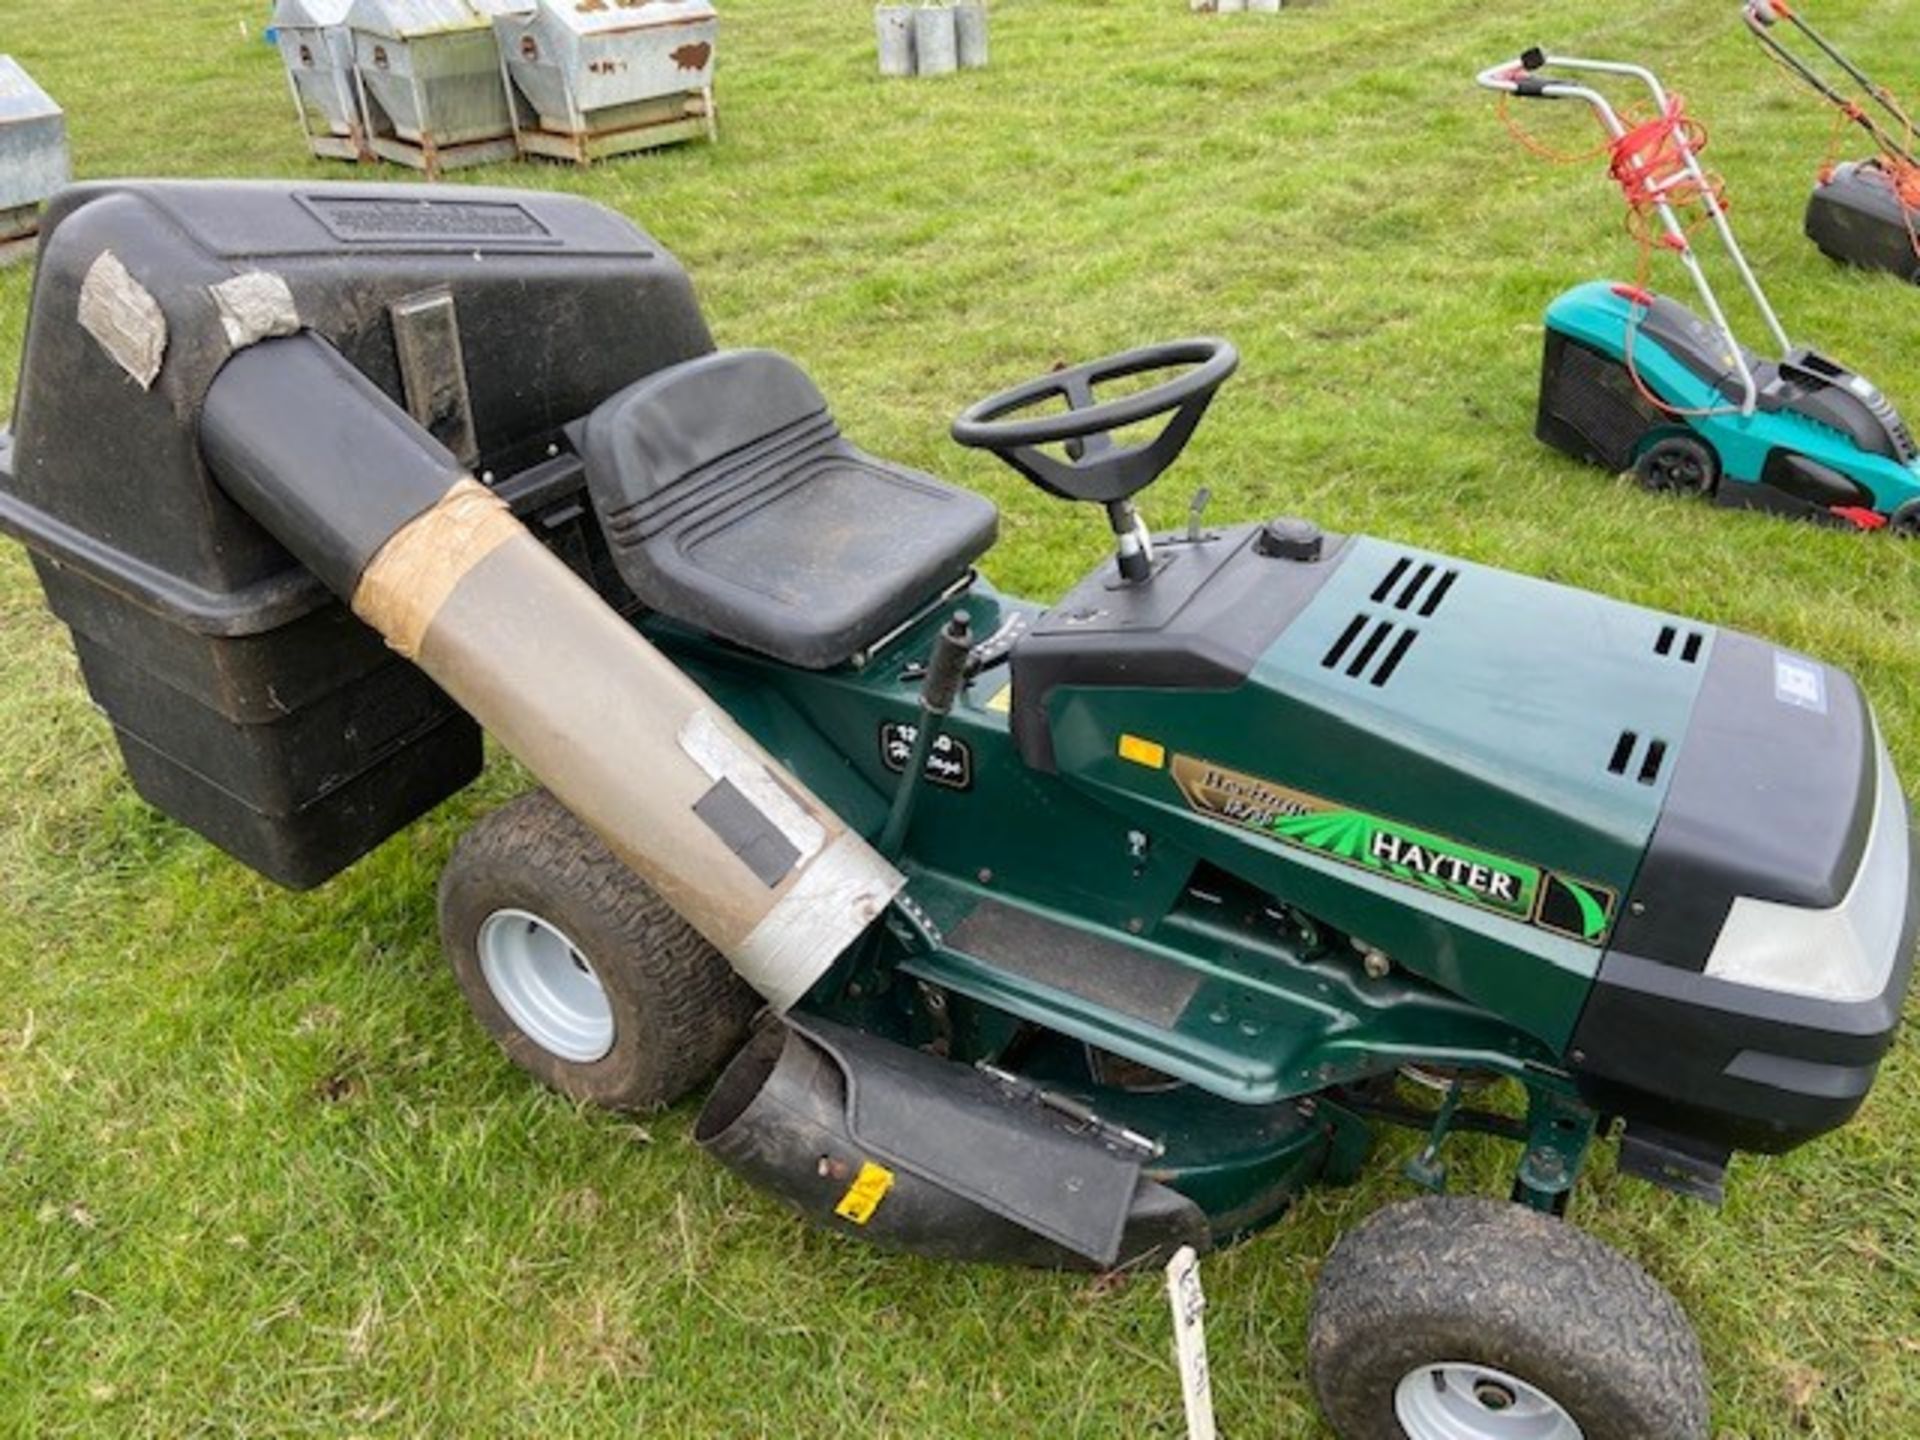 Hayter 12/30 Heritage ride-on lawn mower, needs new battery but otherwise in good working order with - Image 2 of 3